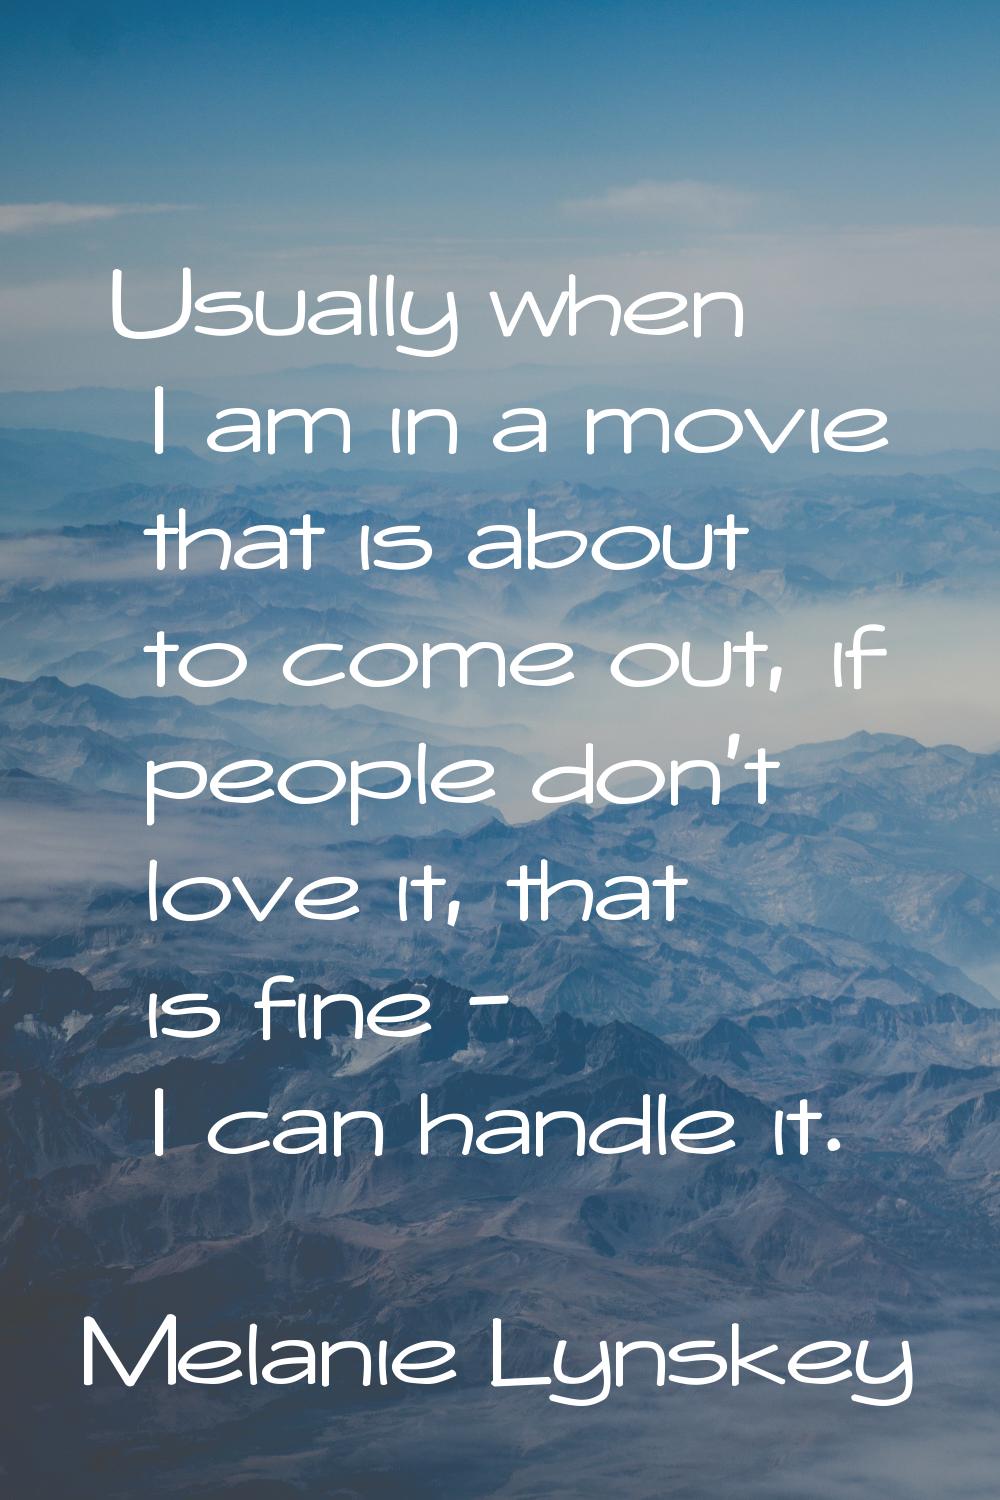 Usually when I am in a movie that is about to come out, if people don't love it, that is fine - I c